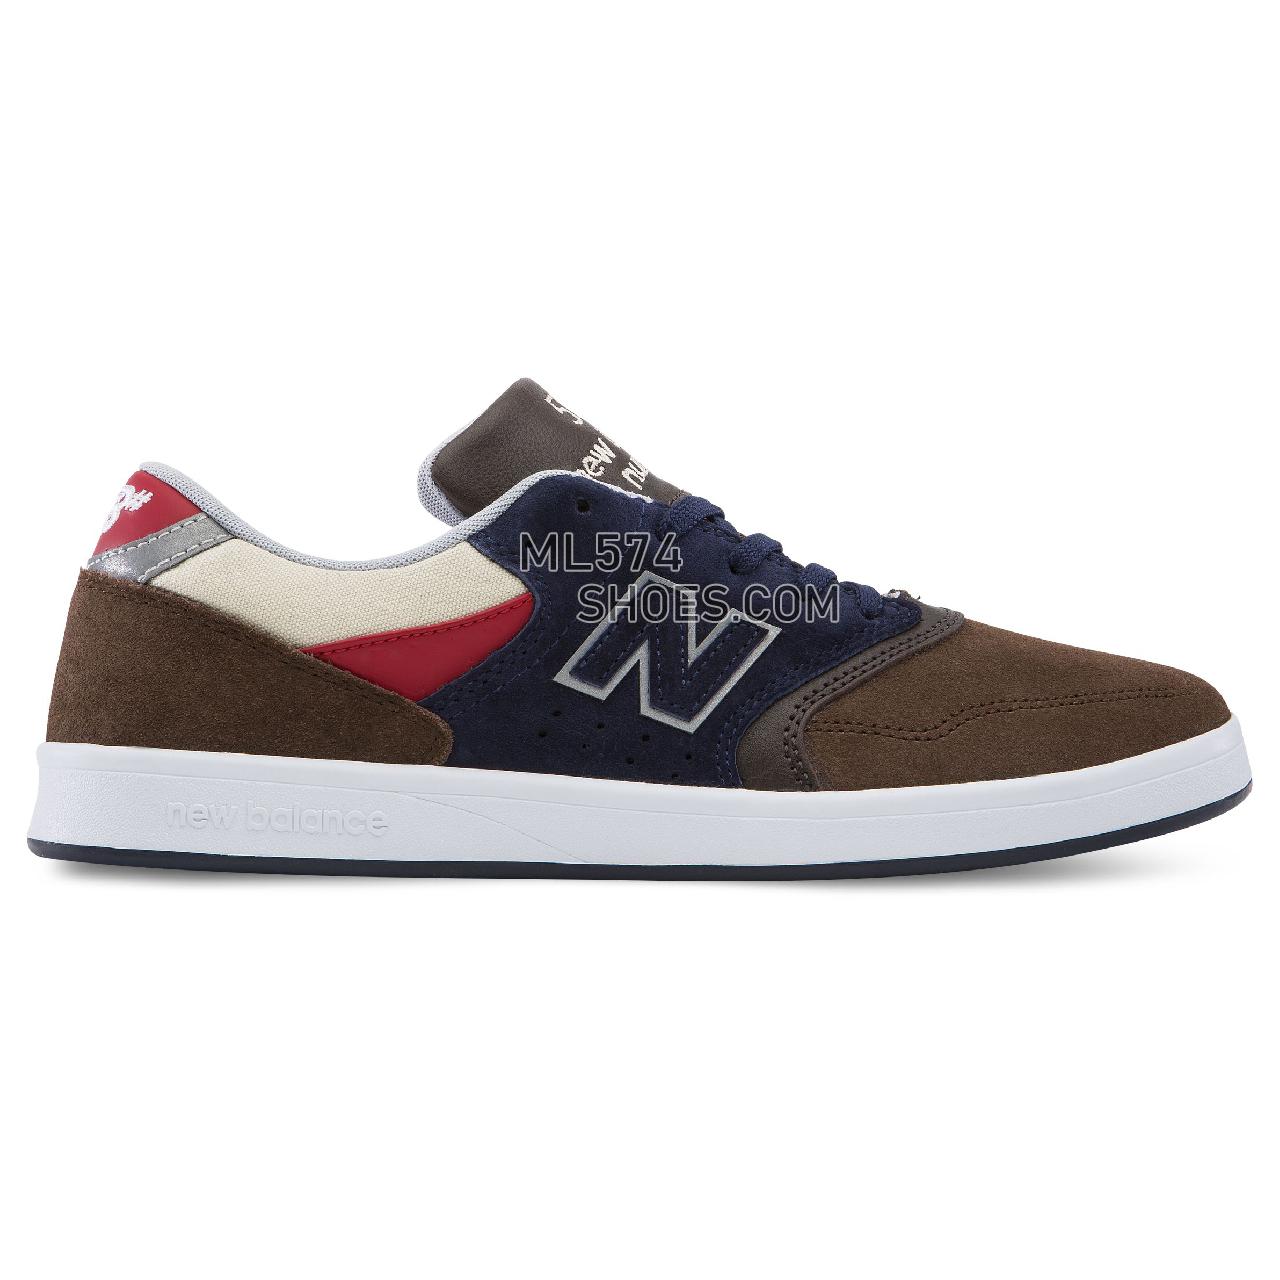 New Balance 598 - Men's 598 - Classic Brown with Blue and Red - NM598TRI